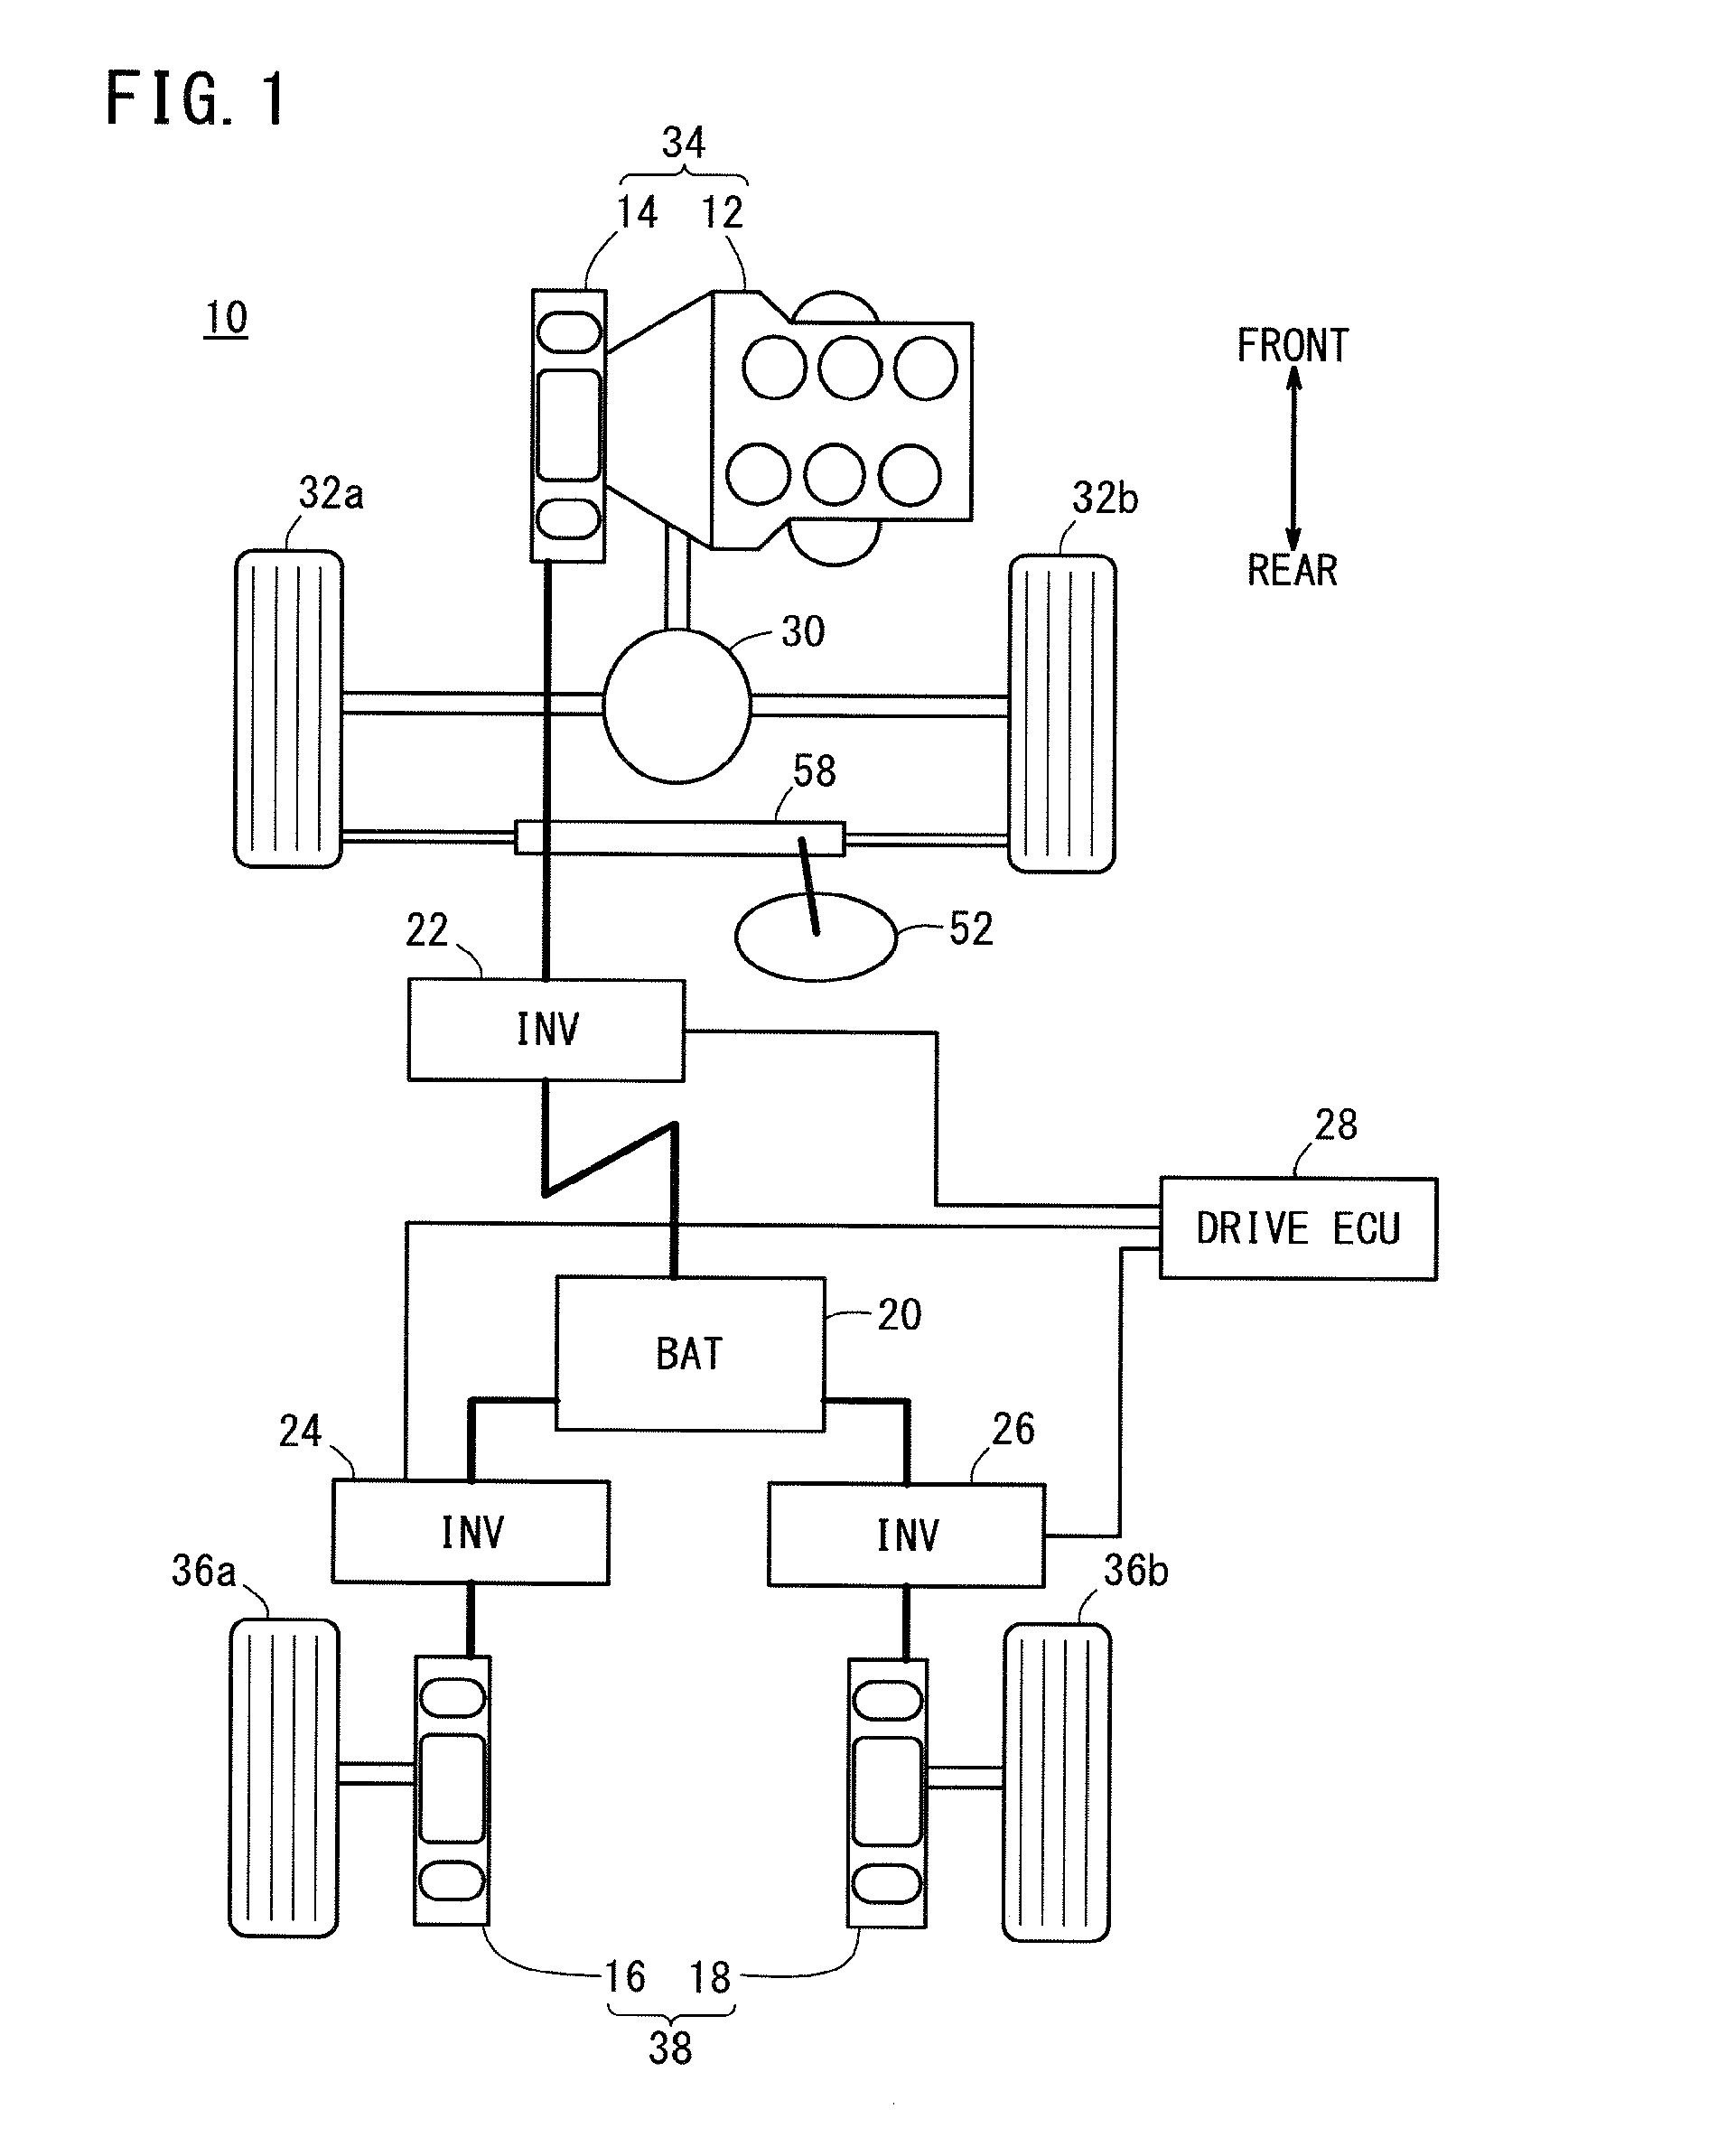 Vehicle and steering apparatus